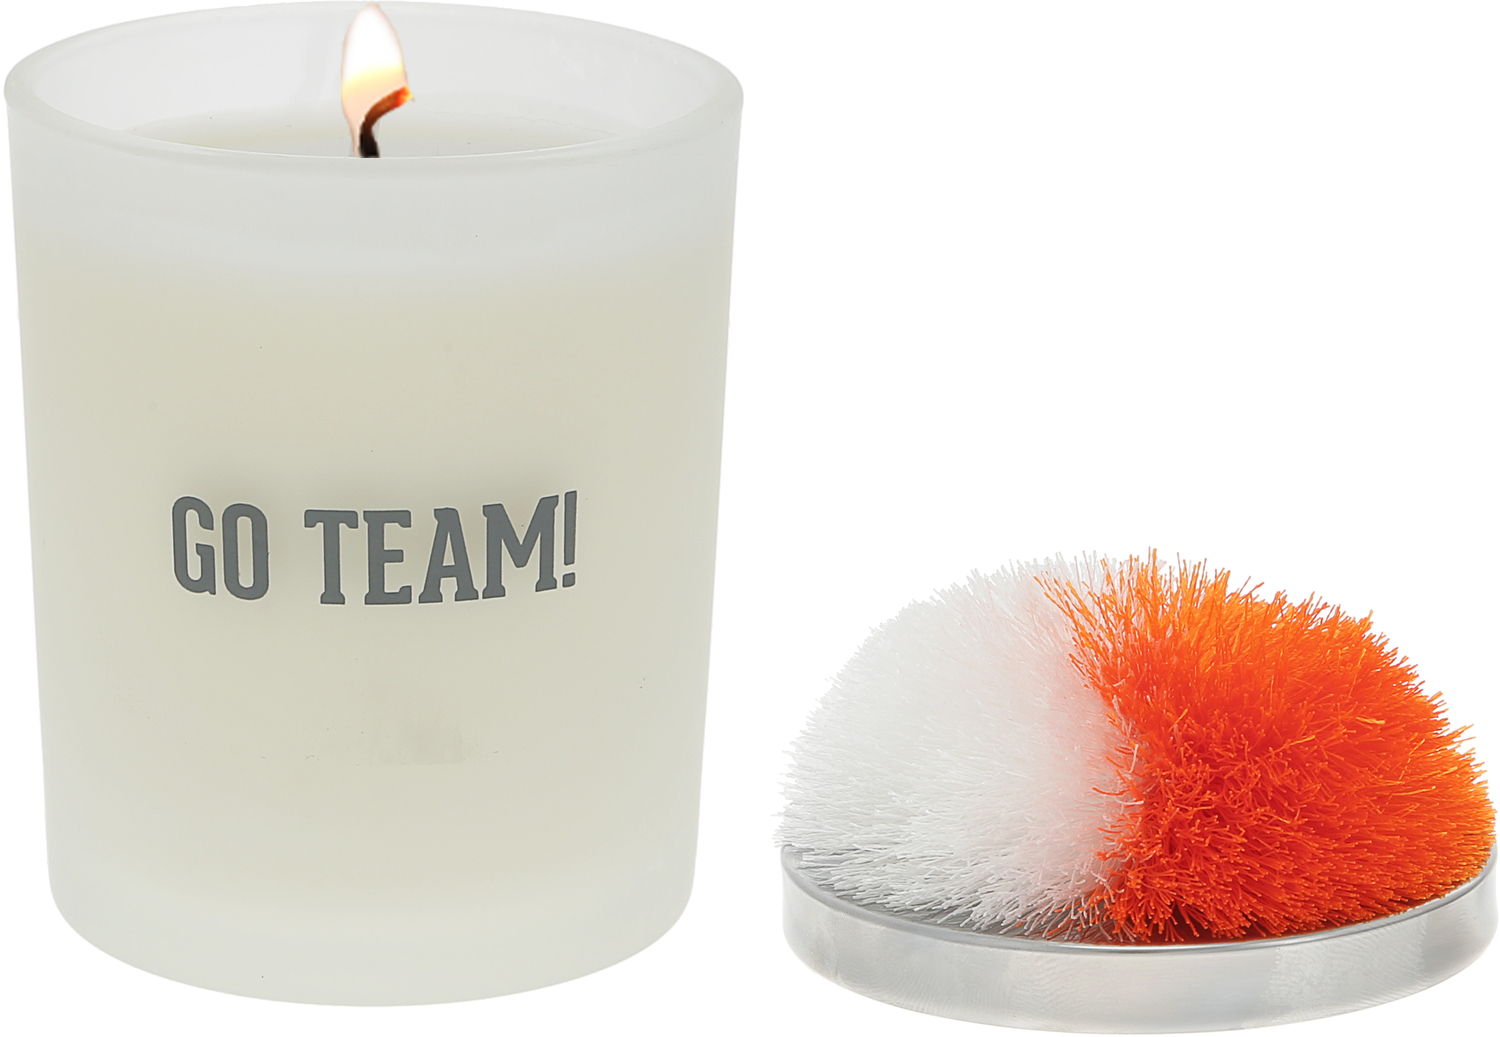 Go Team! - Orange & White by Repre-Scent - Go Team! - Orange & White - 5.5 oz - 100% Soy Wax Candle with Pom Pom Lid
Scent: Tranquility